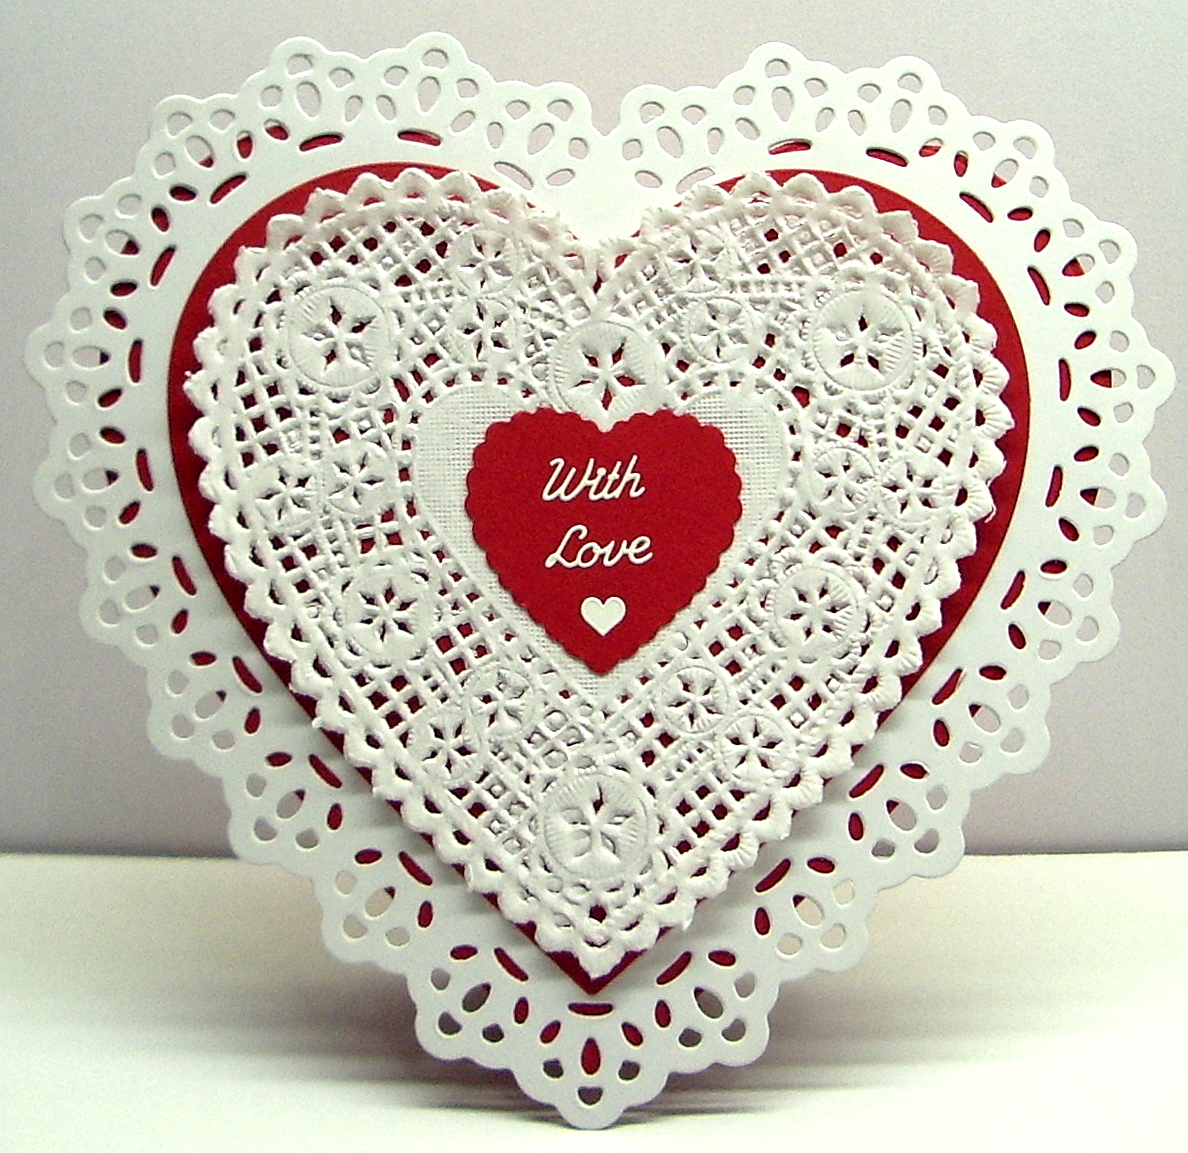 Heart paper doily crafts